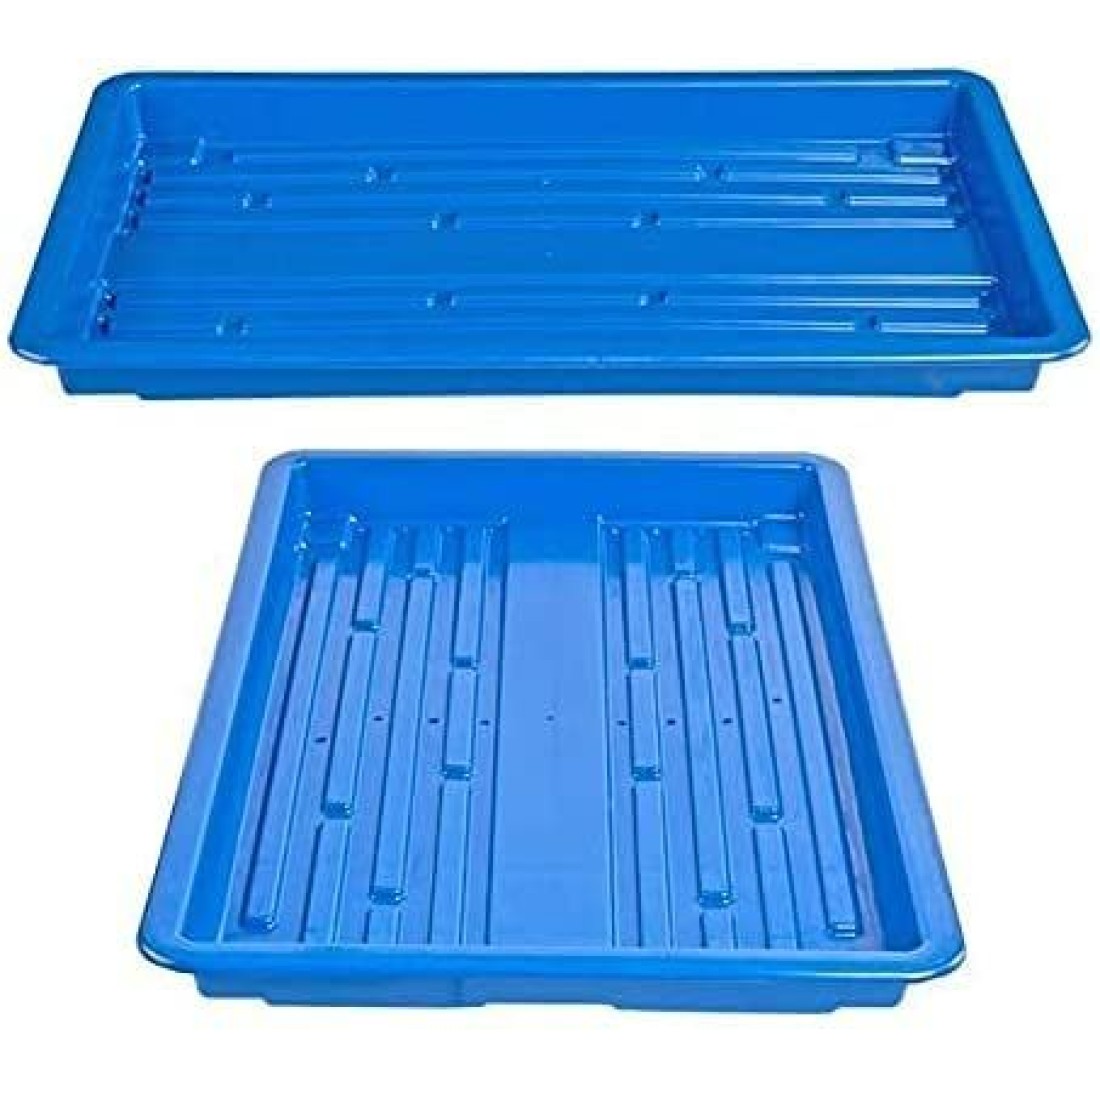 Hydroponics Germination Plastic Tray for Fodder Maize/microgreens/Seedling/Wheatgrass (Blue), 5 Pieces 1